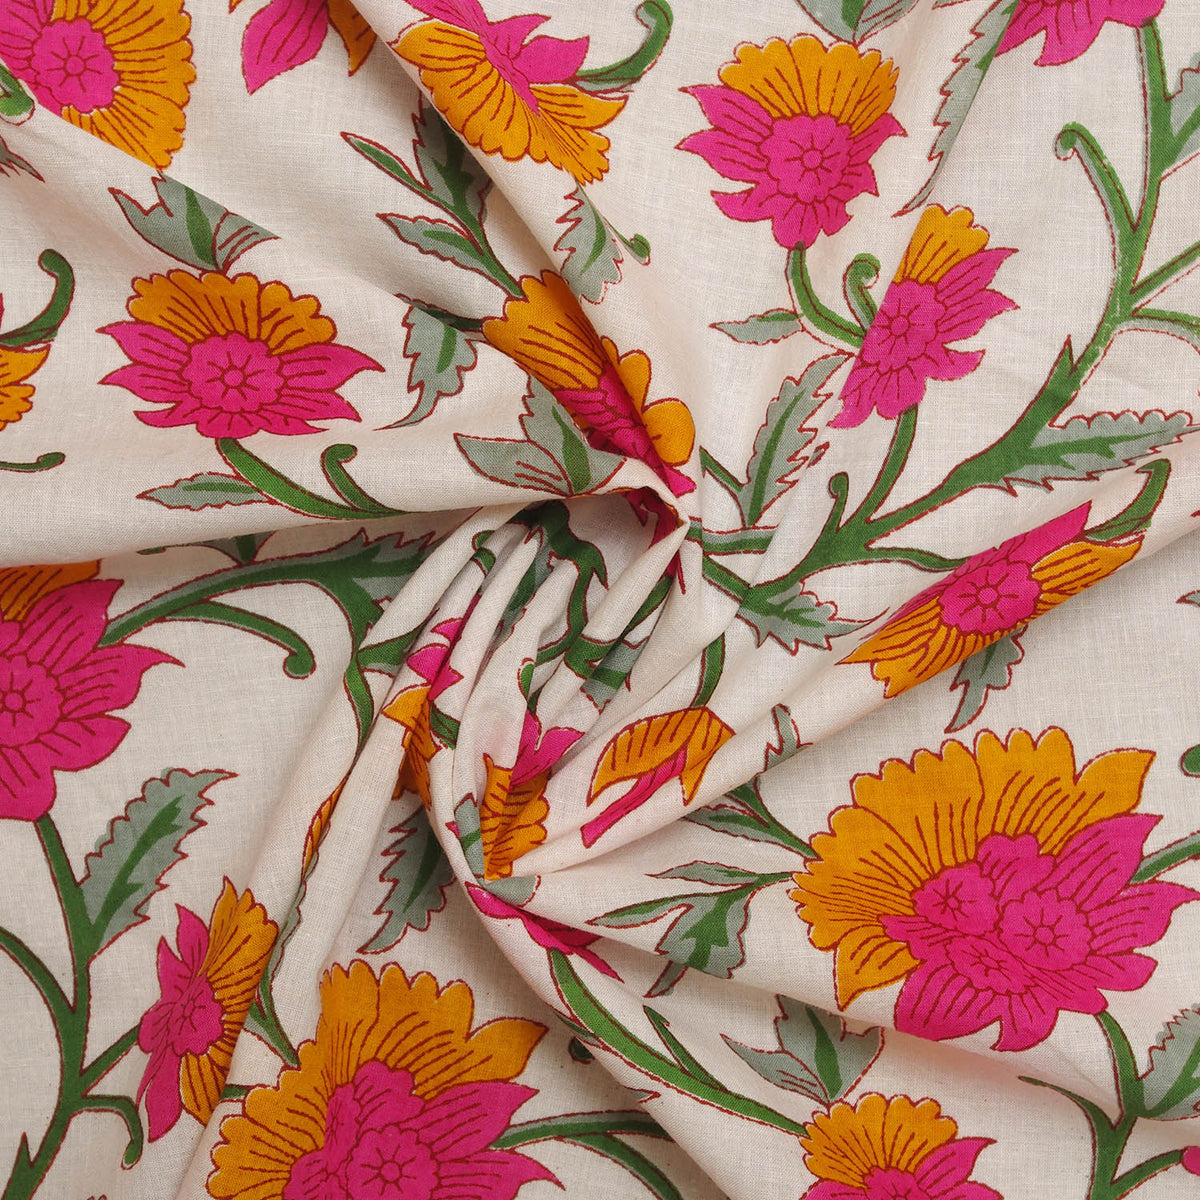 Indian Hand Block Print Pearl White Pink Yellow Floral 100% Cotton Women Dress Fabric Design 50